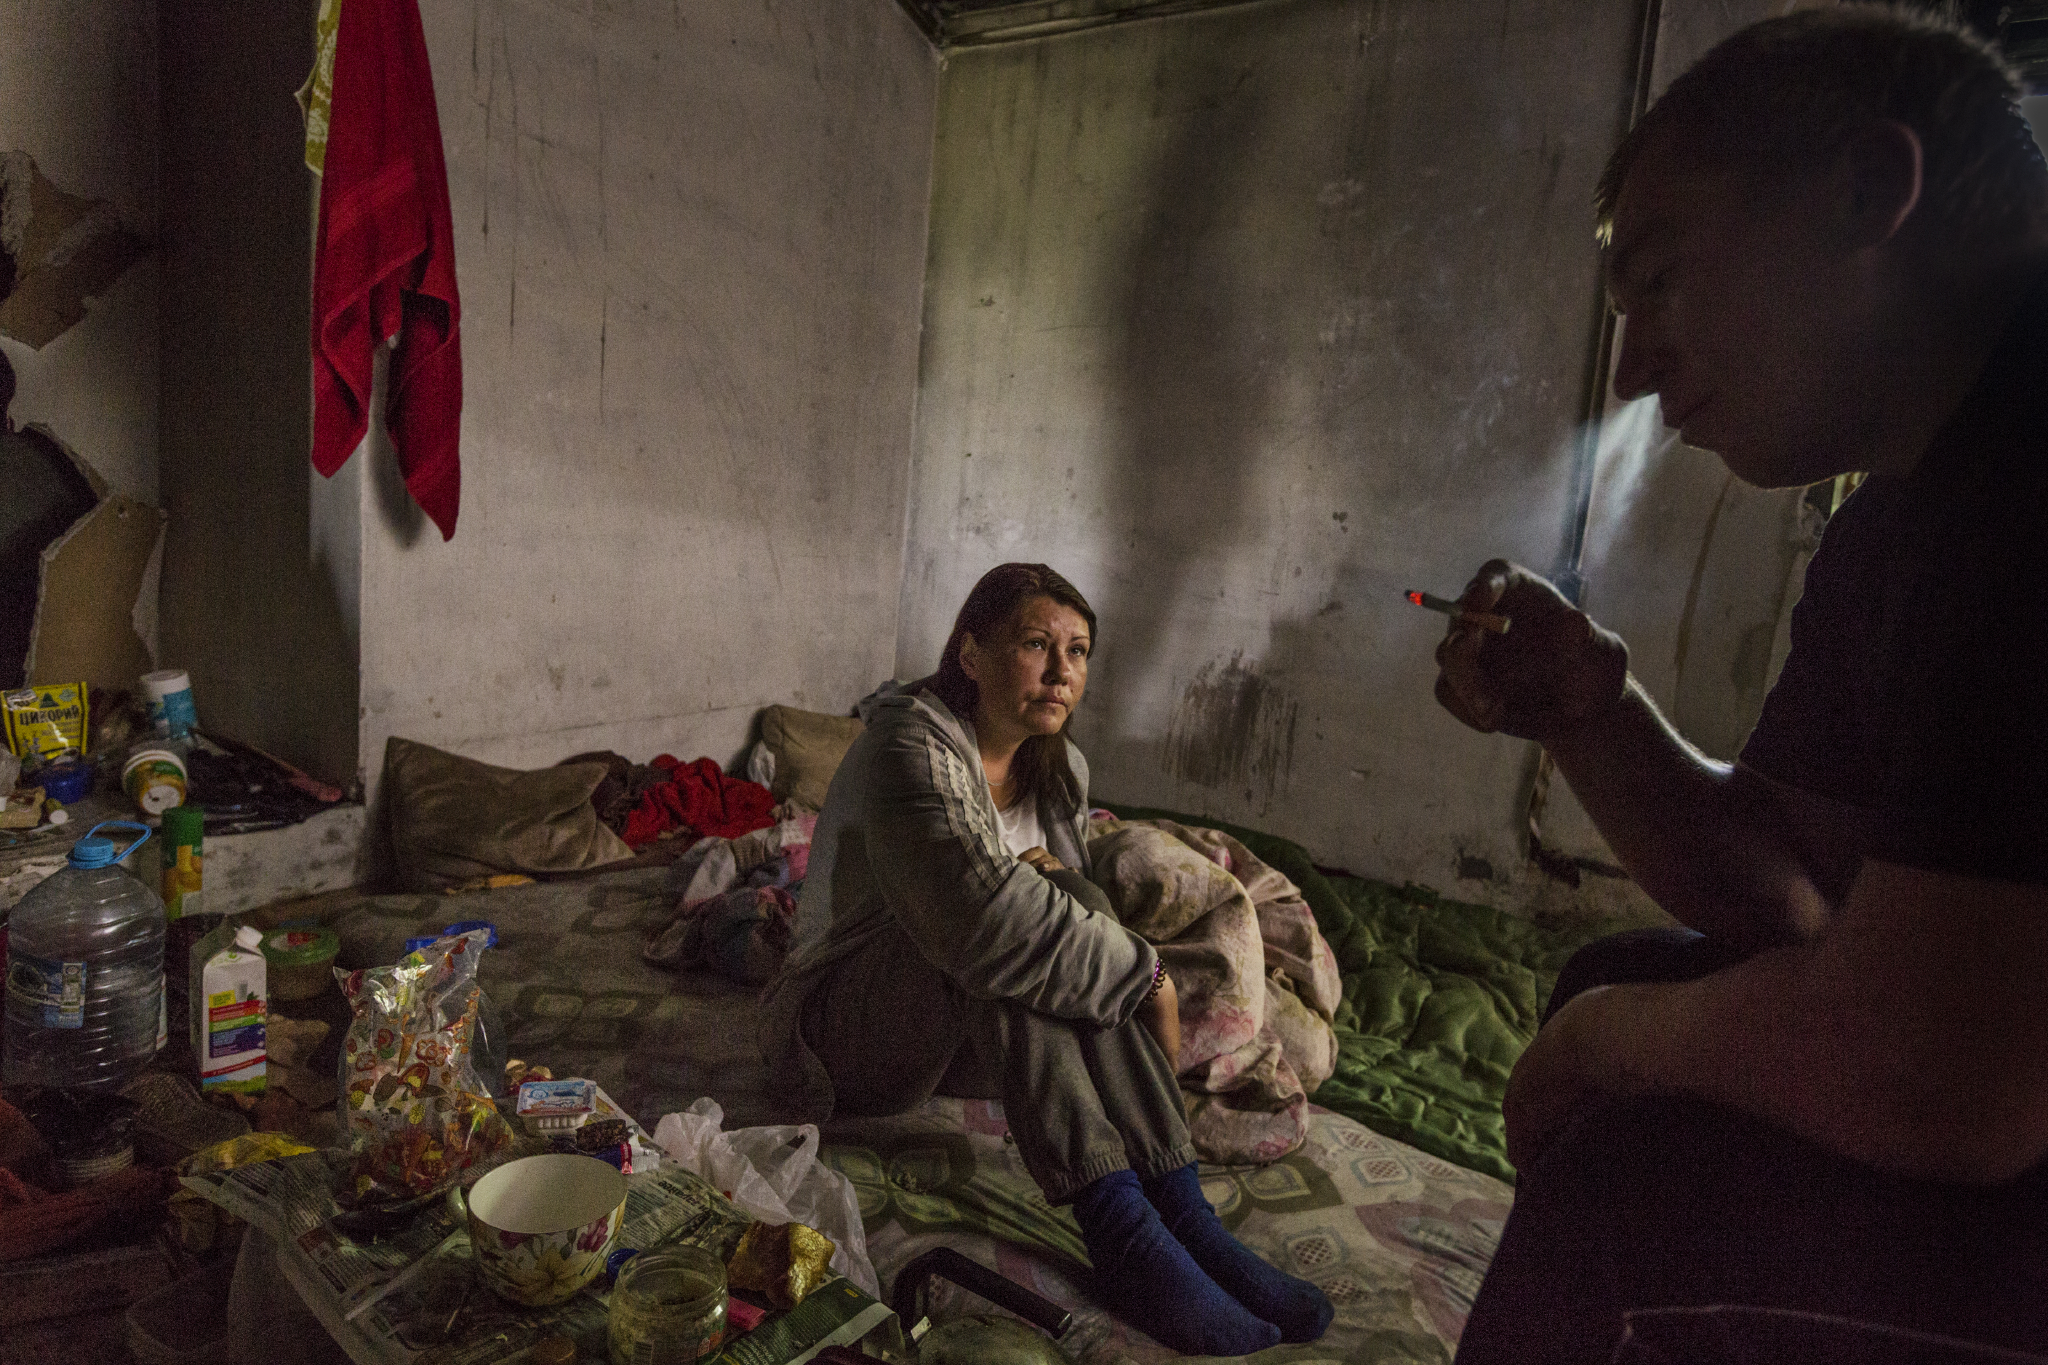  Yevgeniy, 29, has lost his documents and now cannot return to his hometown of Kursk. Homeless, he now lives together with two women in their early thirties in an abandoned train depot. While homelessness amongst Russian youth has declined from the s